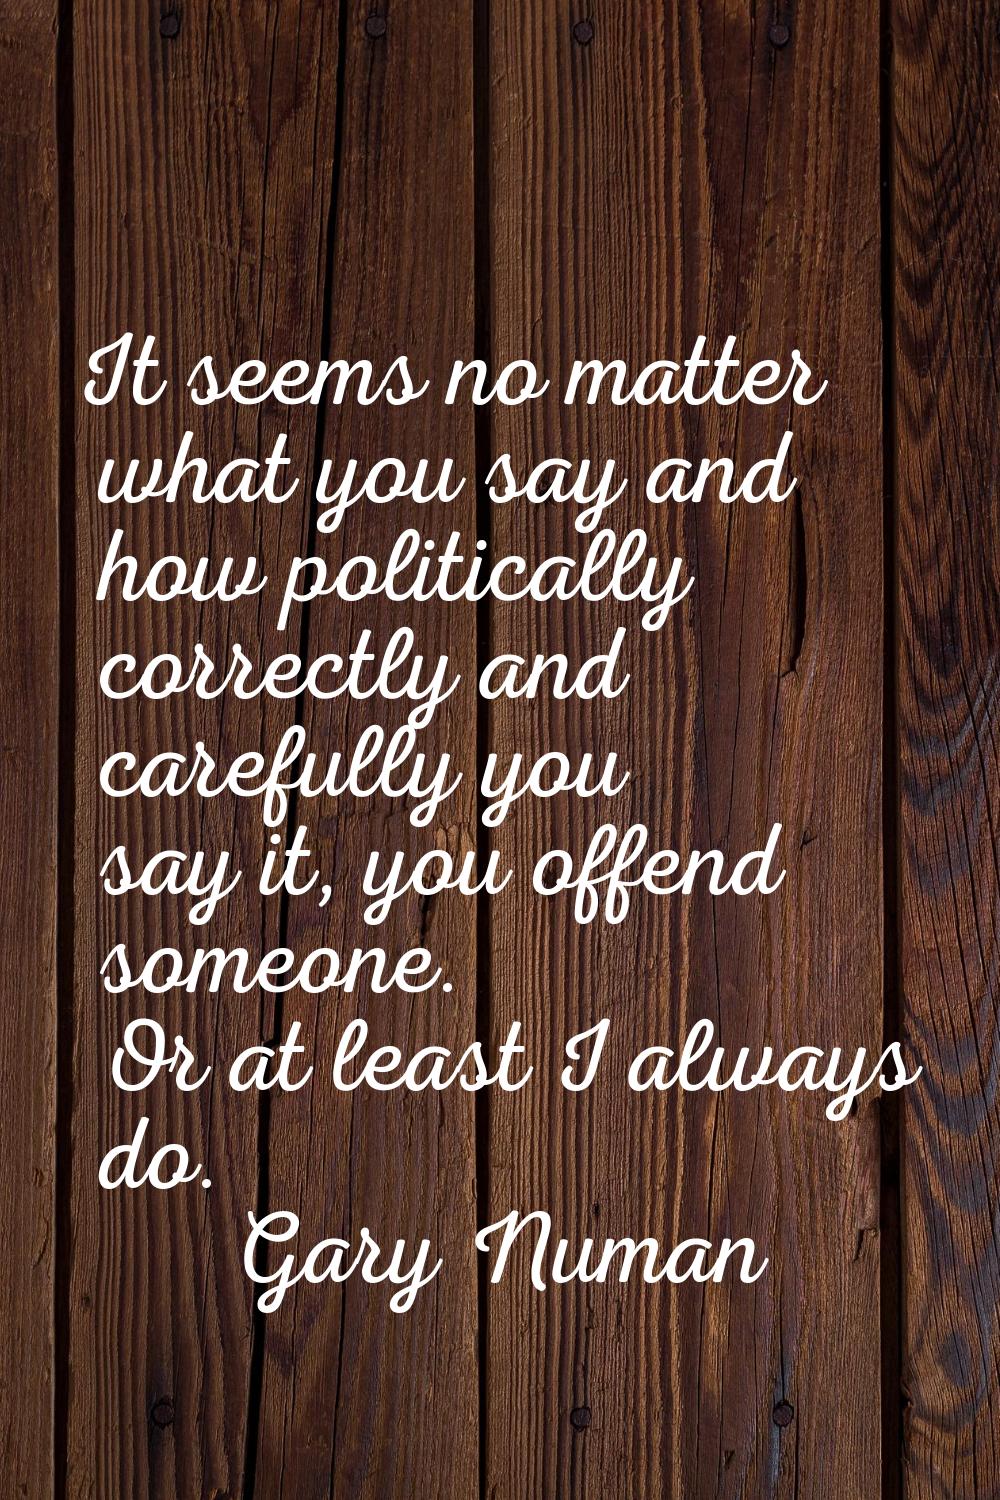 It seems no matter what you say and how politically correctly and carefully you say it, you offend 